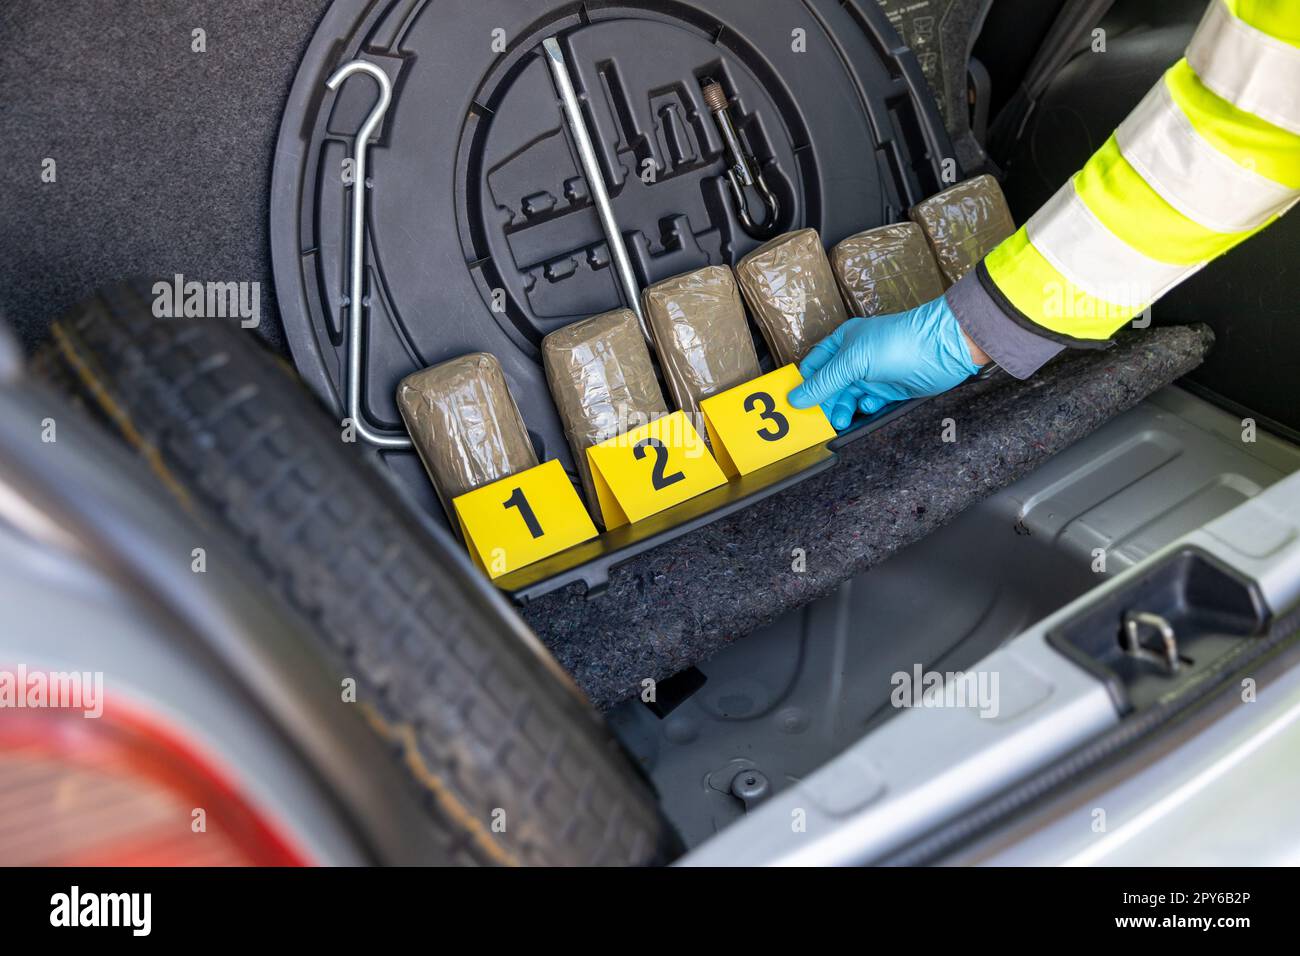 Police seize drug in the trunk of a car during traffic stop Stock Photo